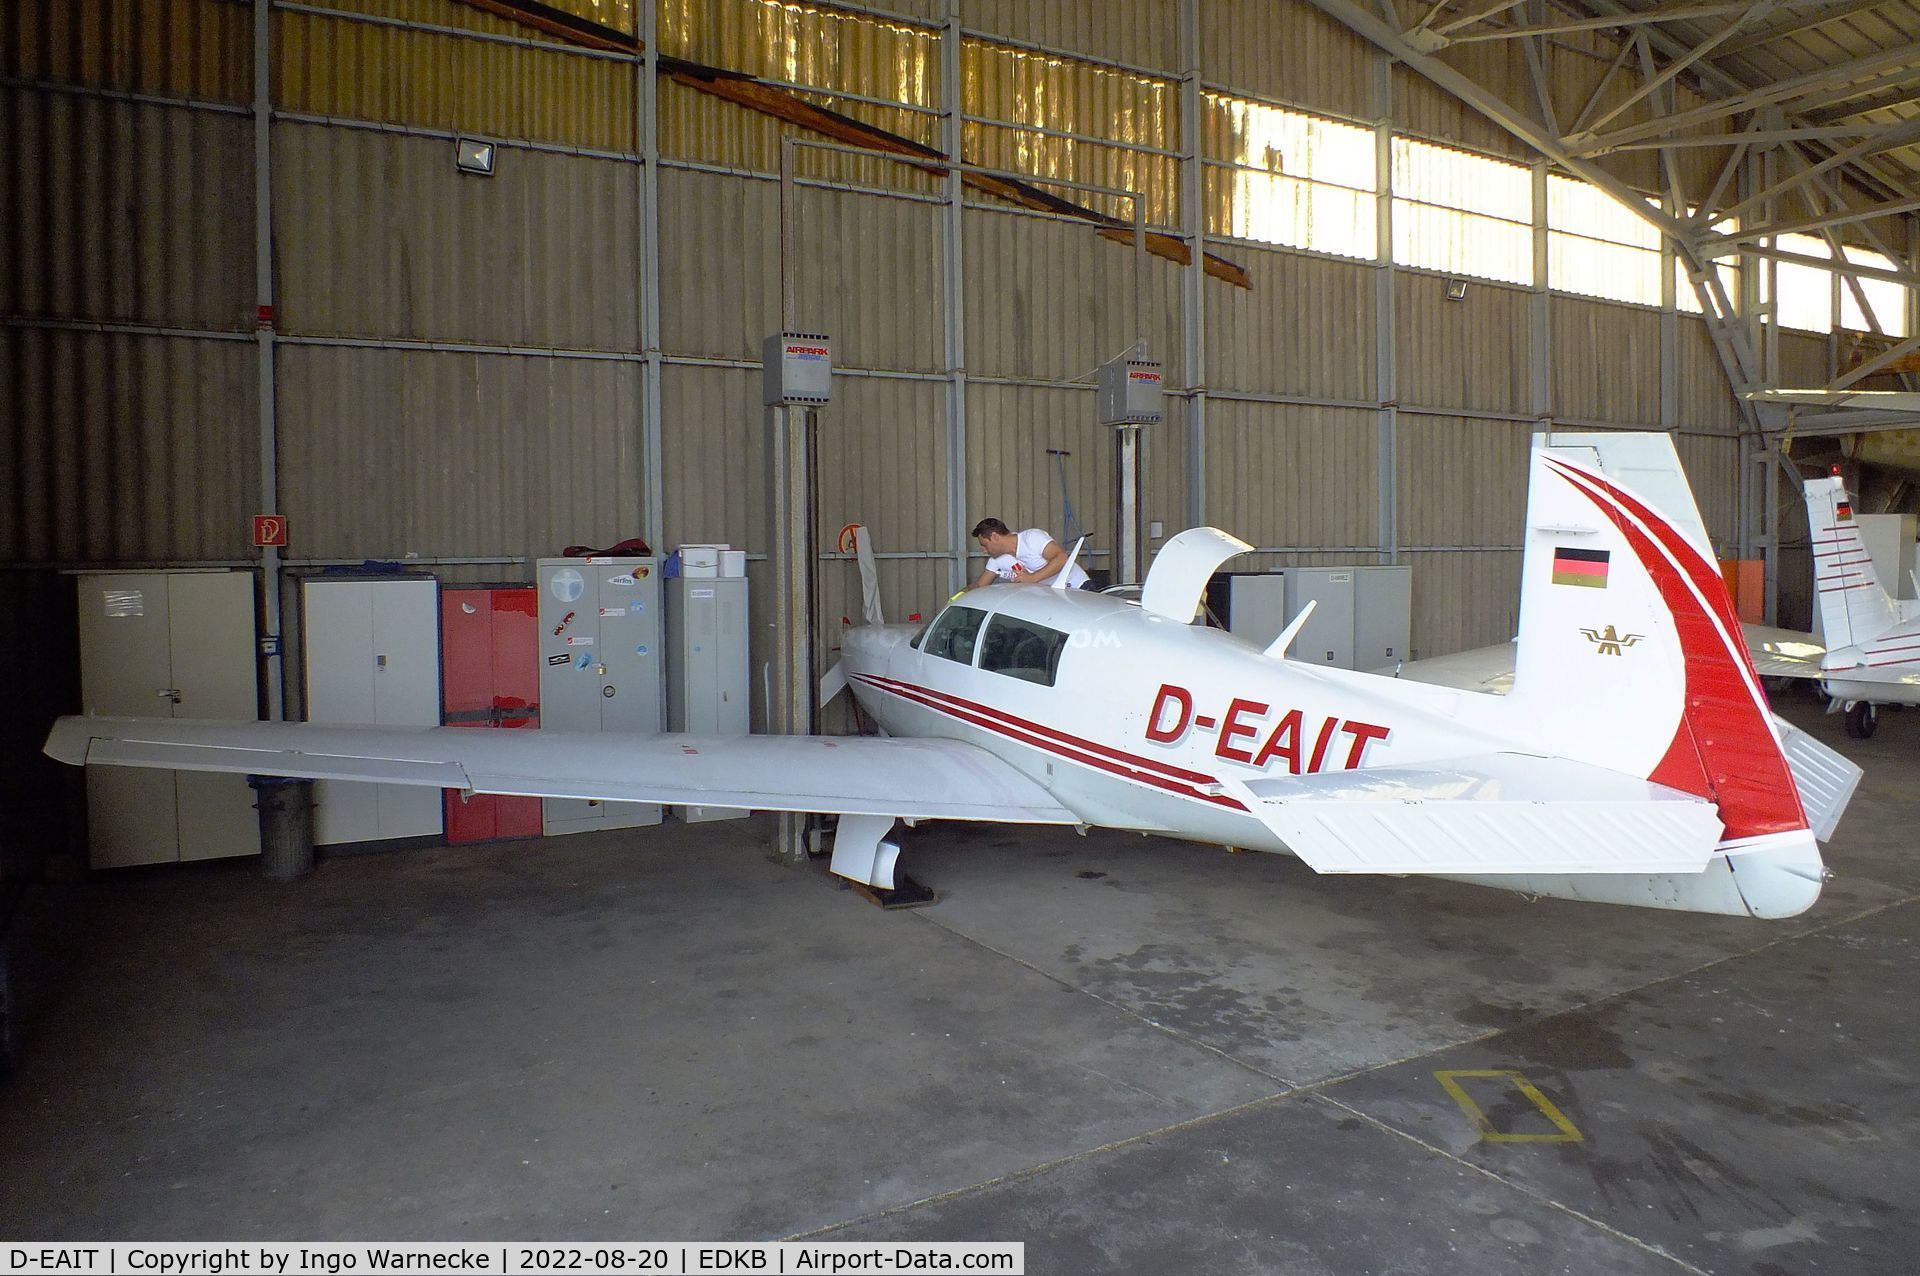 D-EAIT, 1983 Mooney M20K C/N 25-0771, Mooney M20K Model 231 at Bonn-Hangelar airfield during the Grumman Fly-in 2022